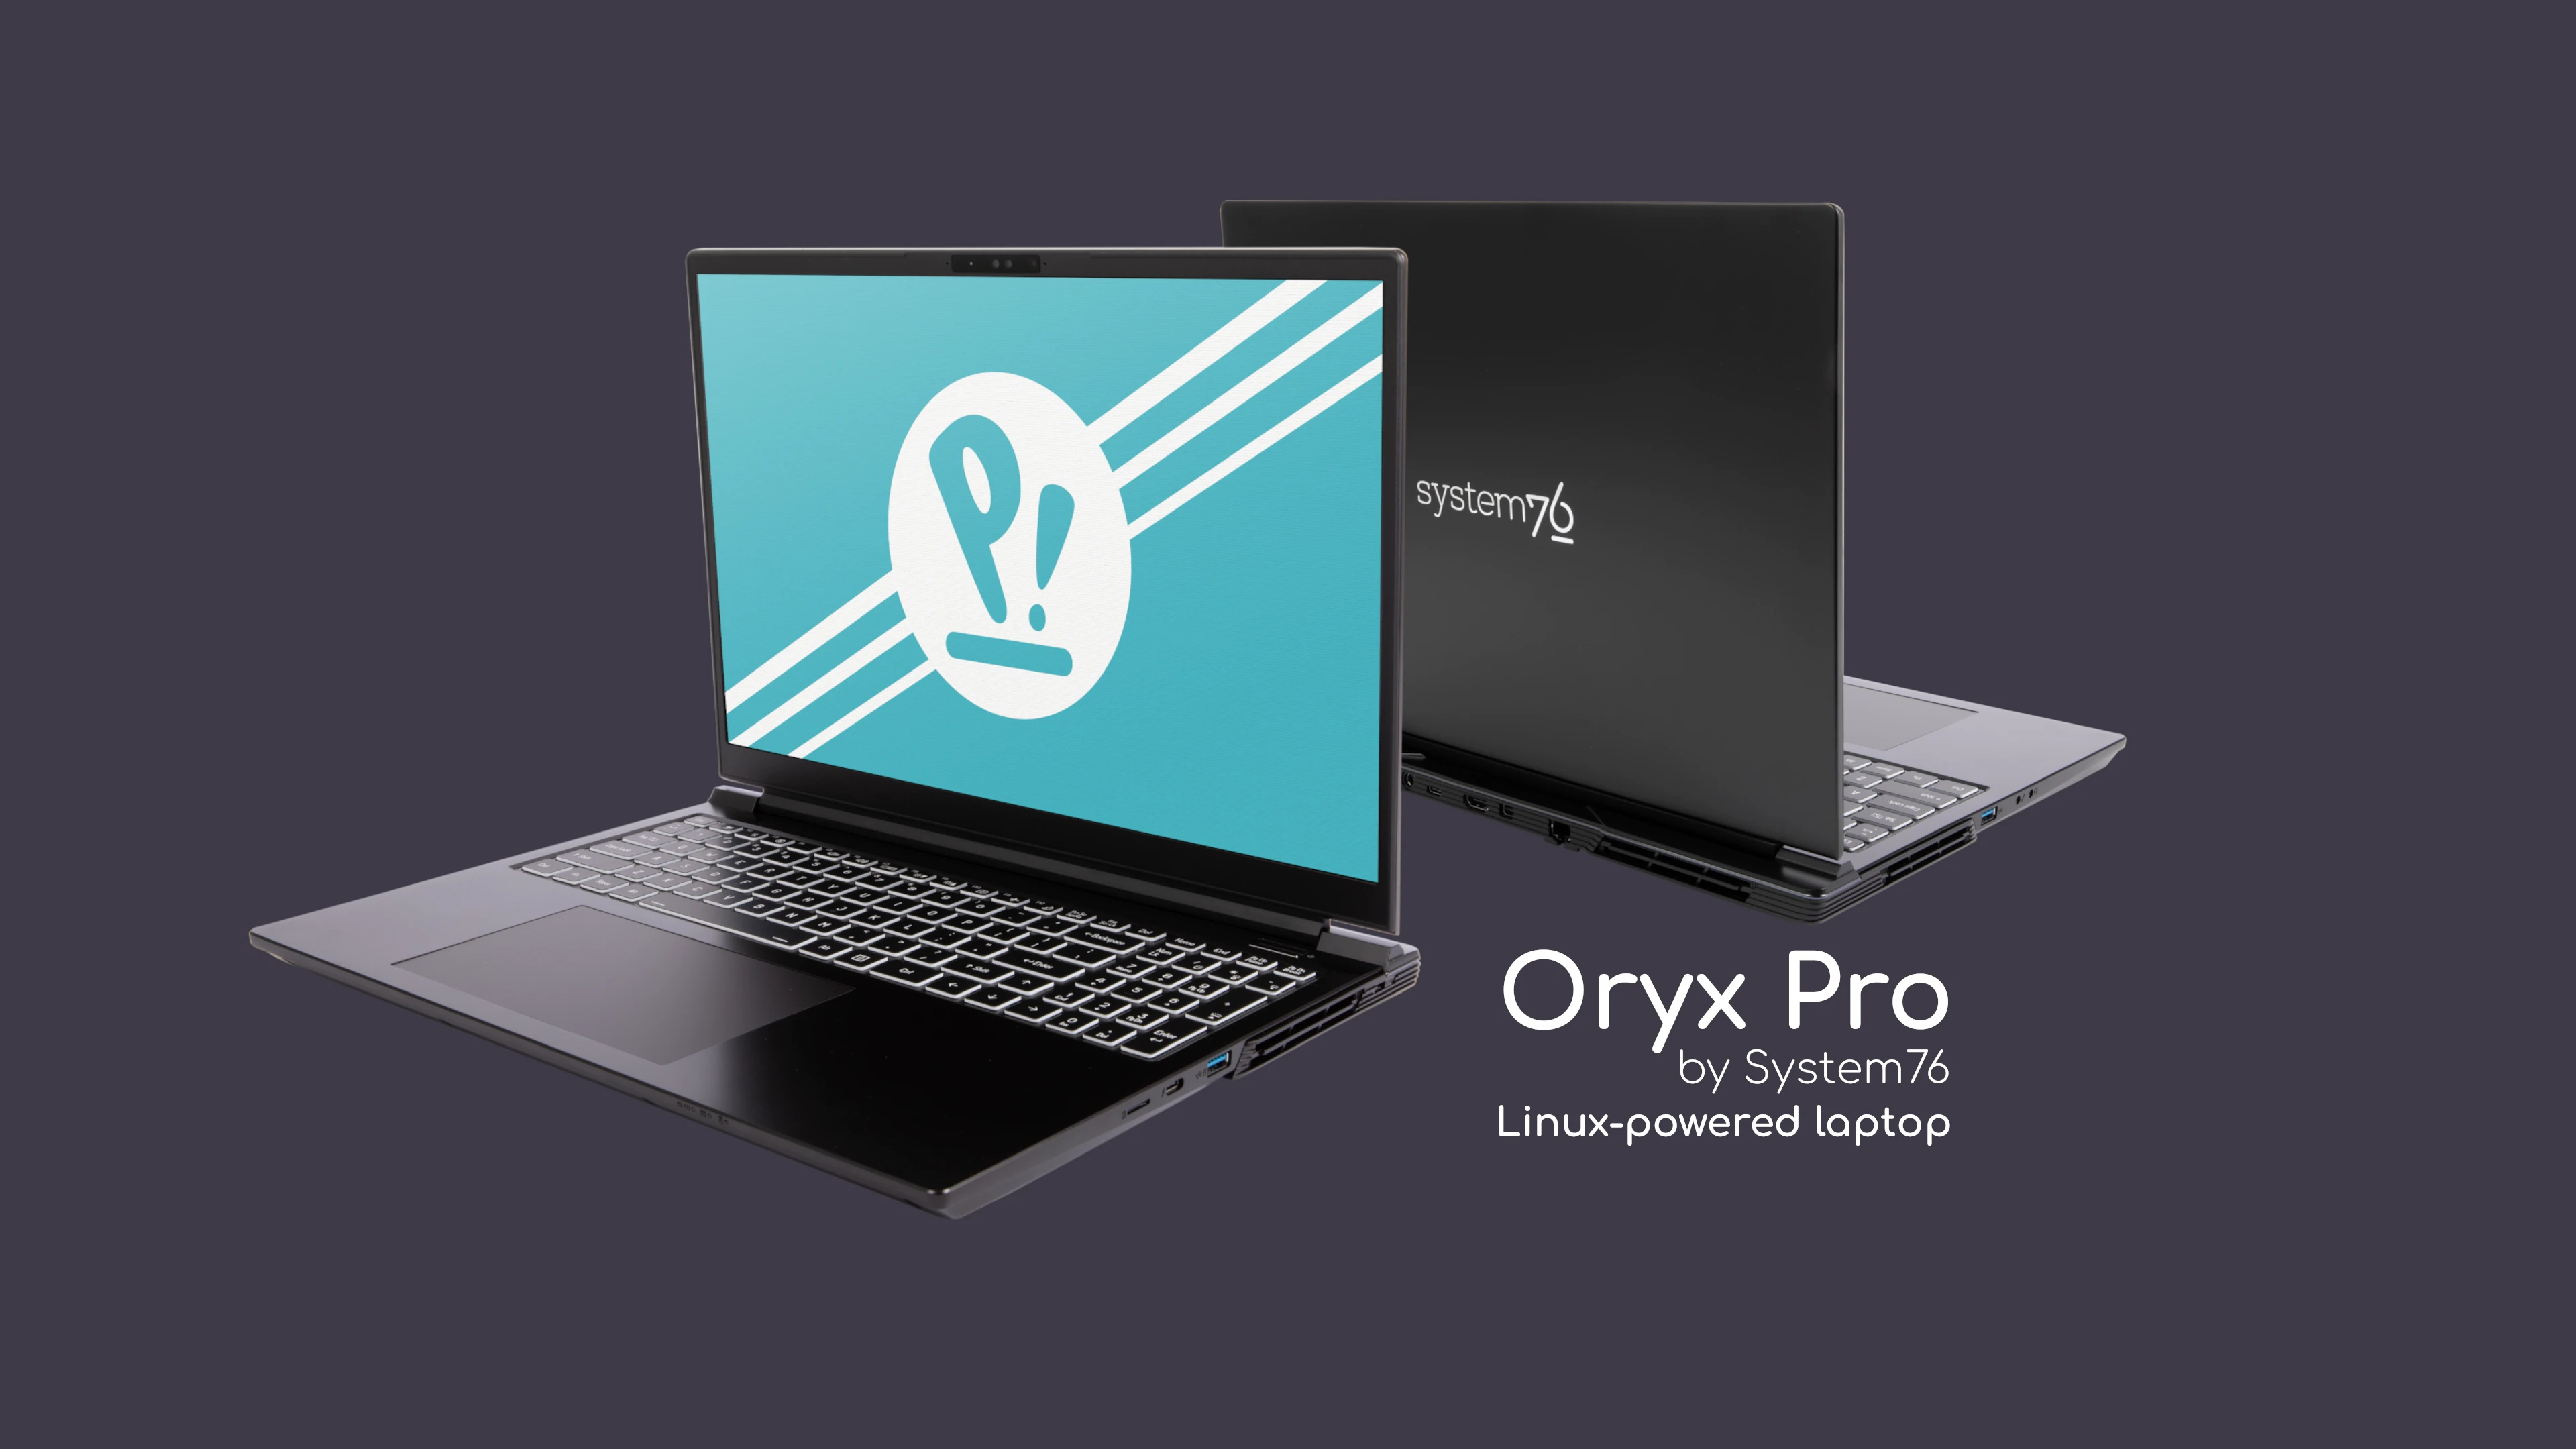 System76’s Oryx Pro Linux Laptop Gets 14th Gen Intel HX-Class CPU and More RAM